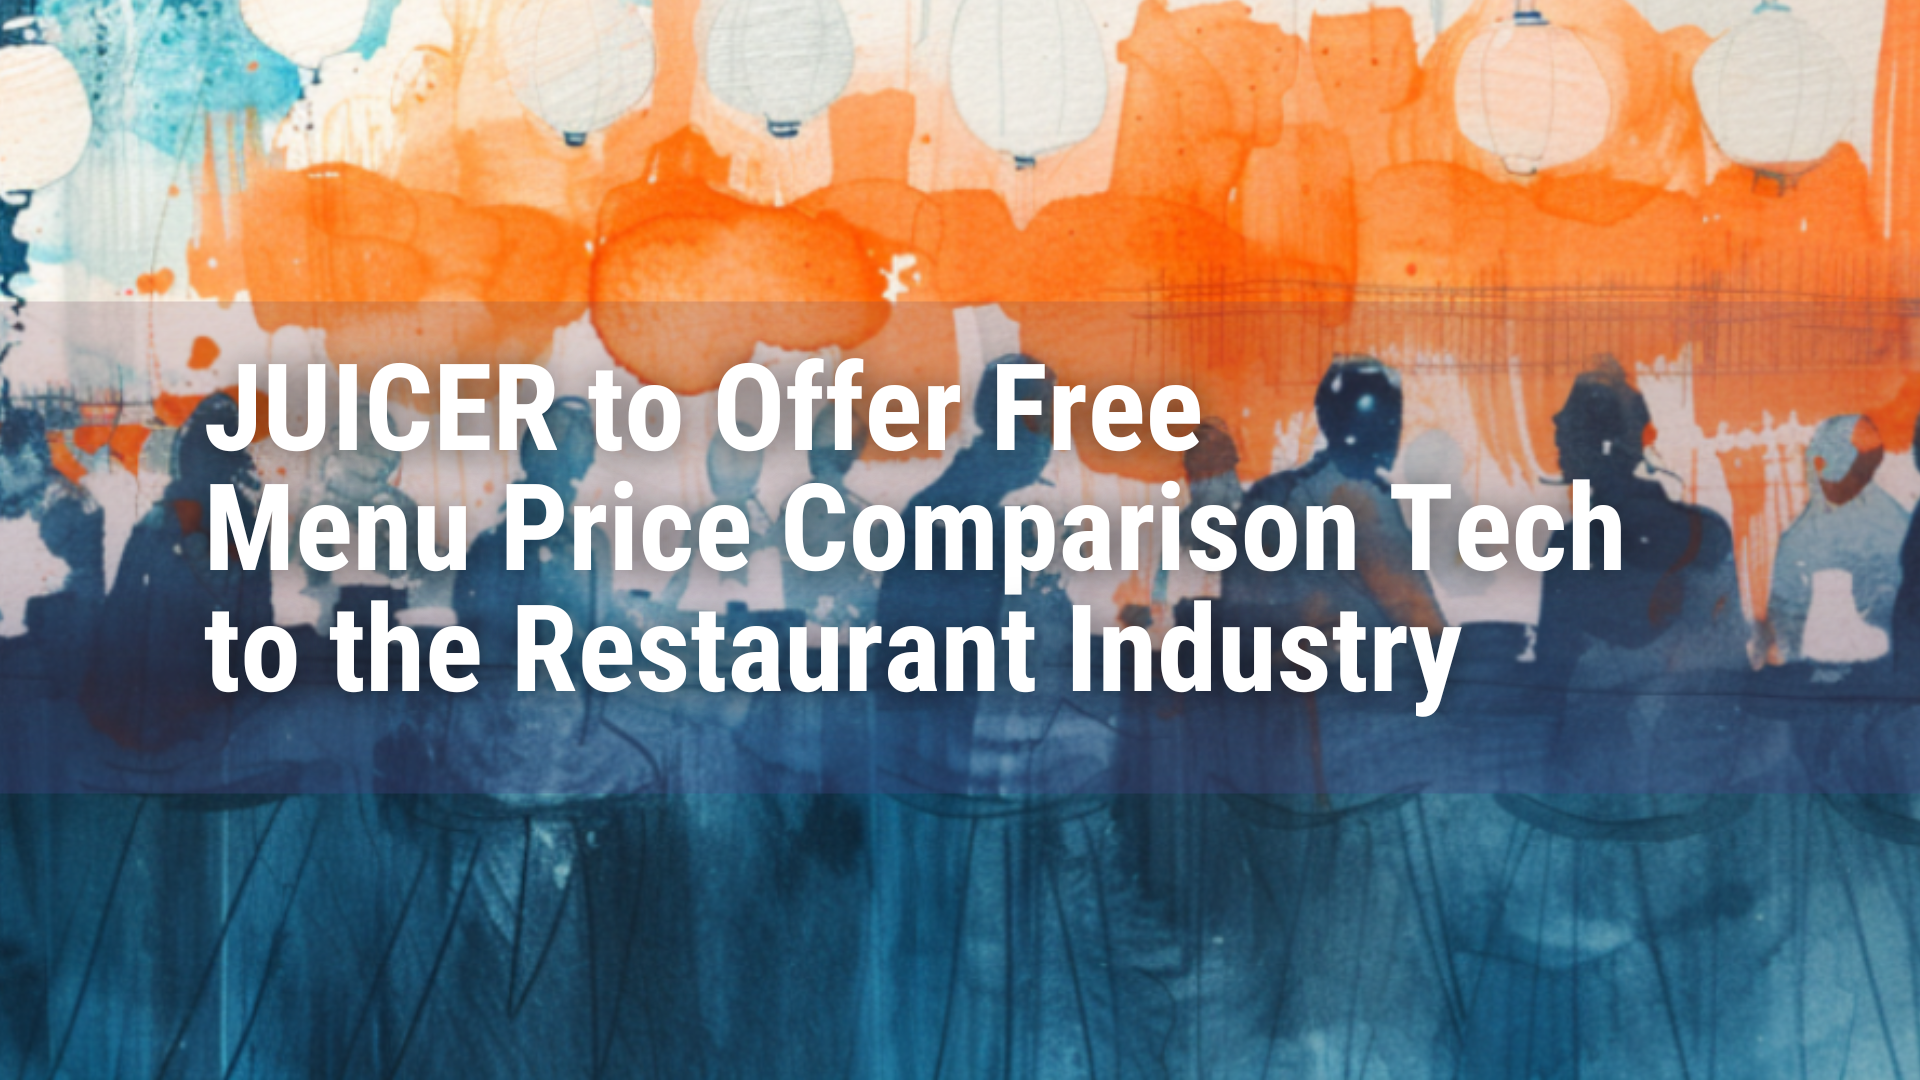 JUICER to Offer Free Menu Price Comparison Tech to the Restaurant Industry